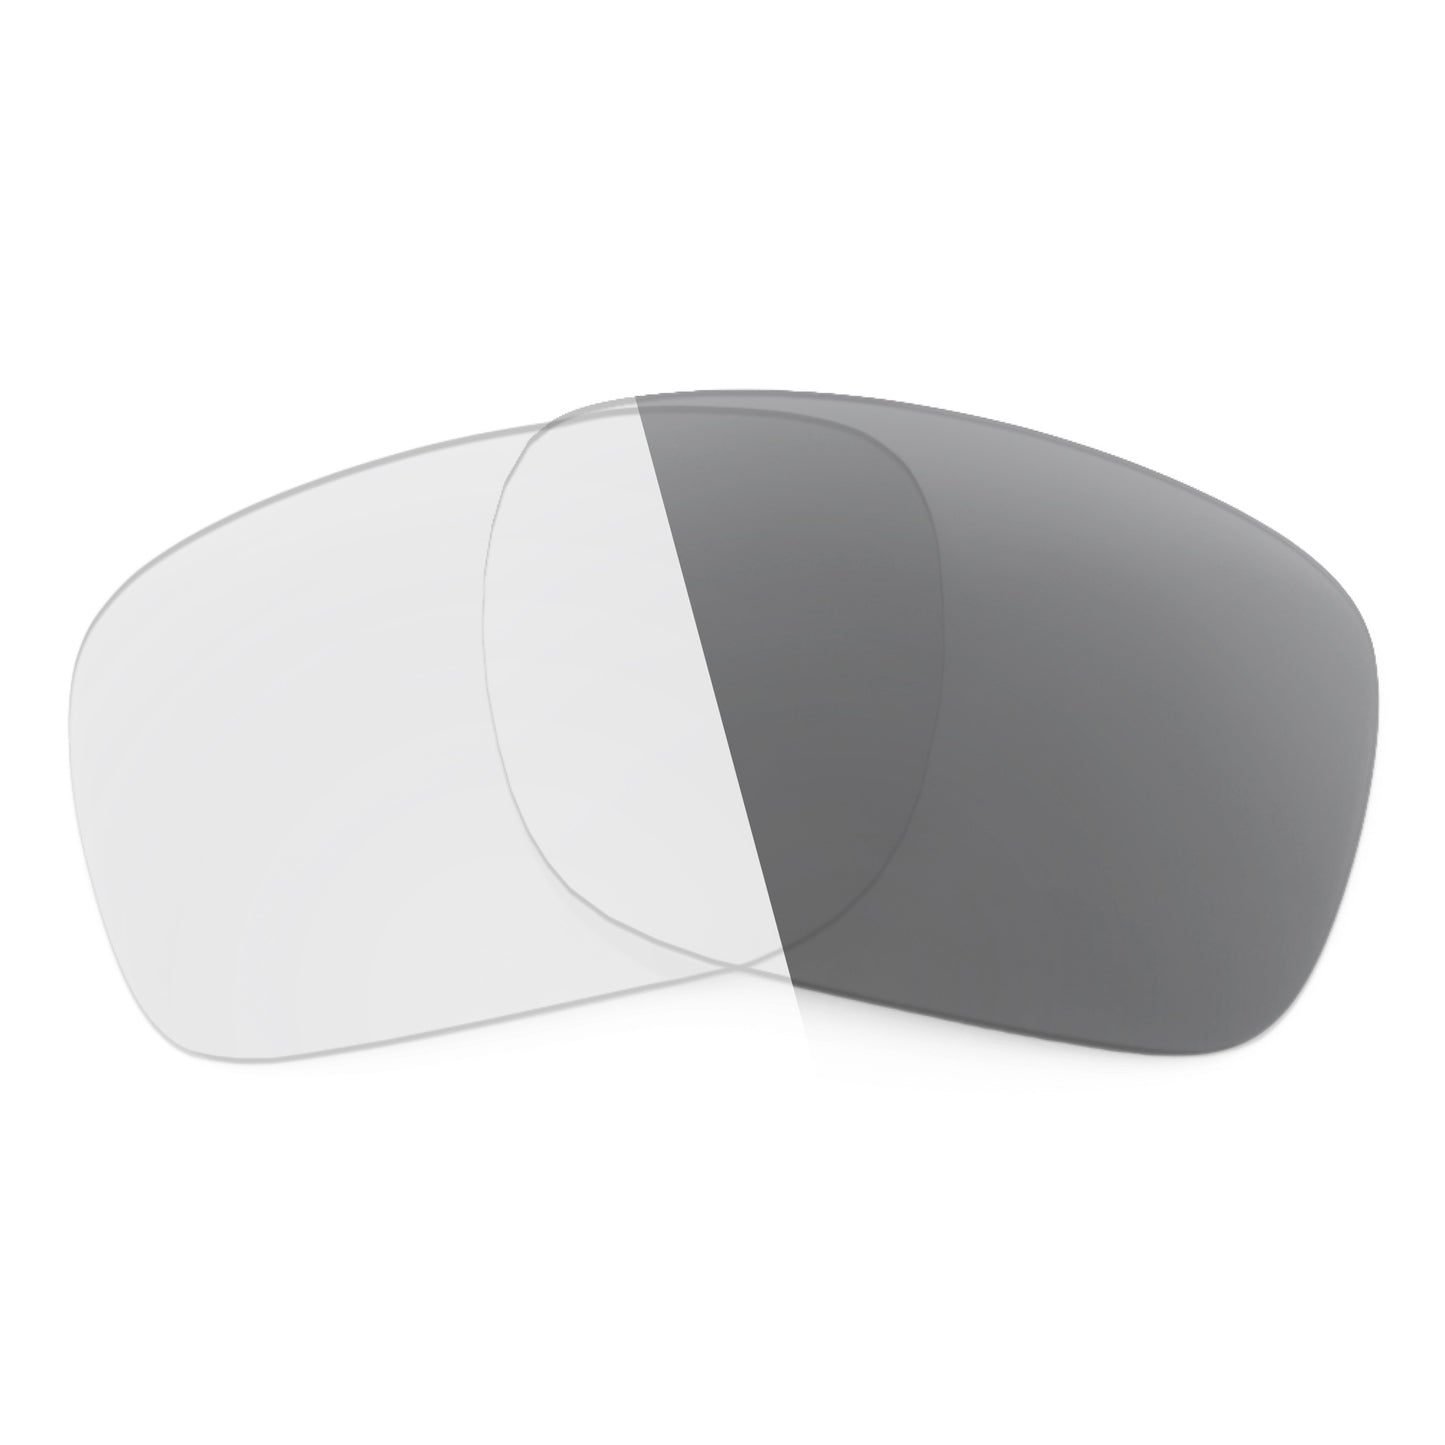 Revant replacement lenses for Maui Jim Mixed Plate MJ721 Non-Polarized Adapt Gray Photochromic